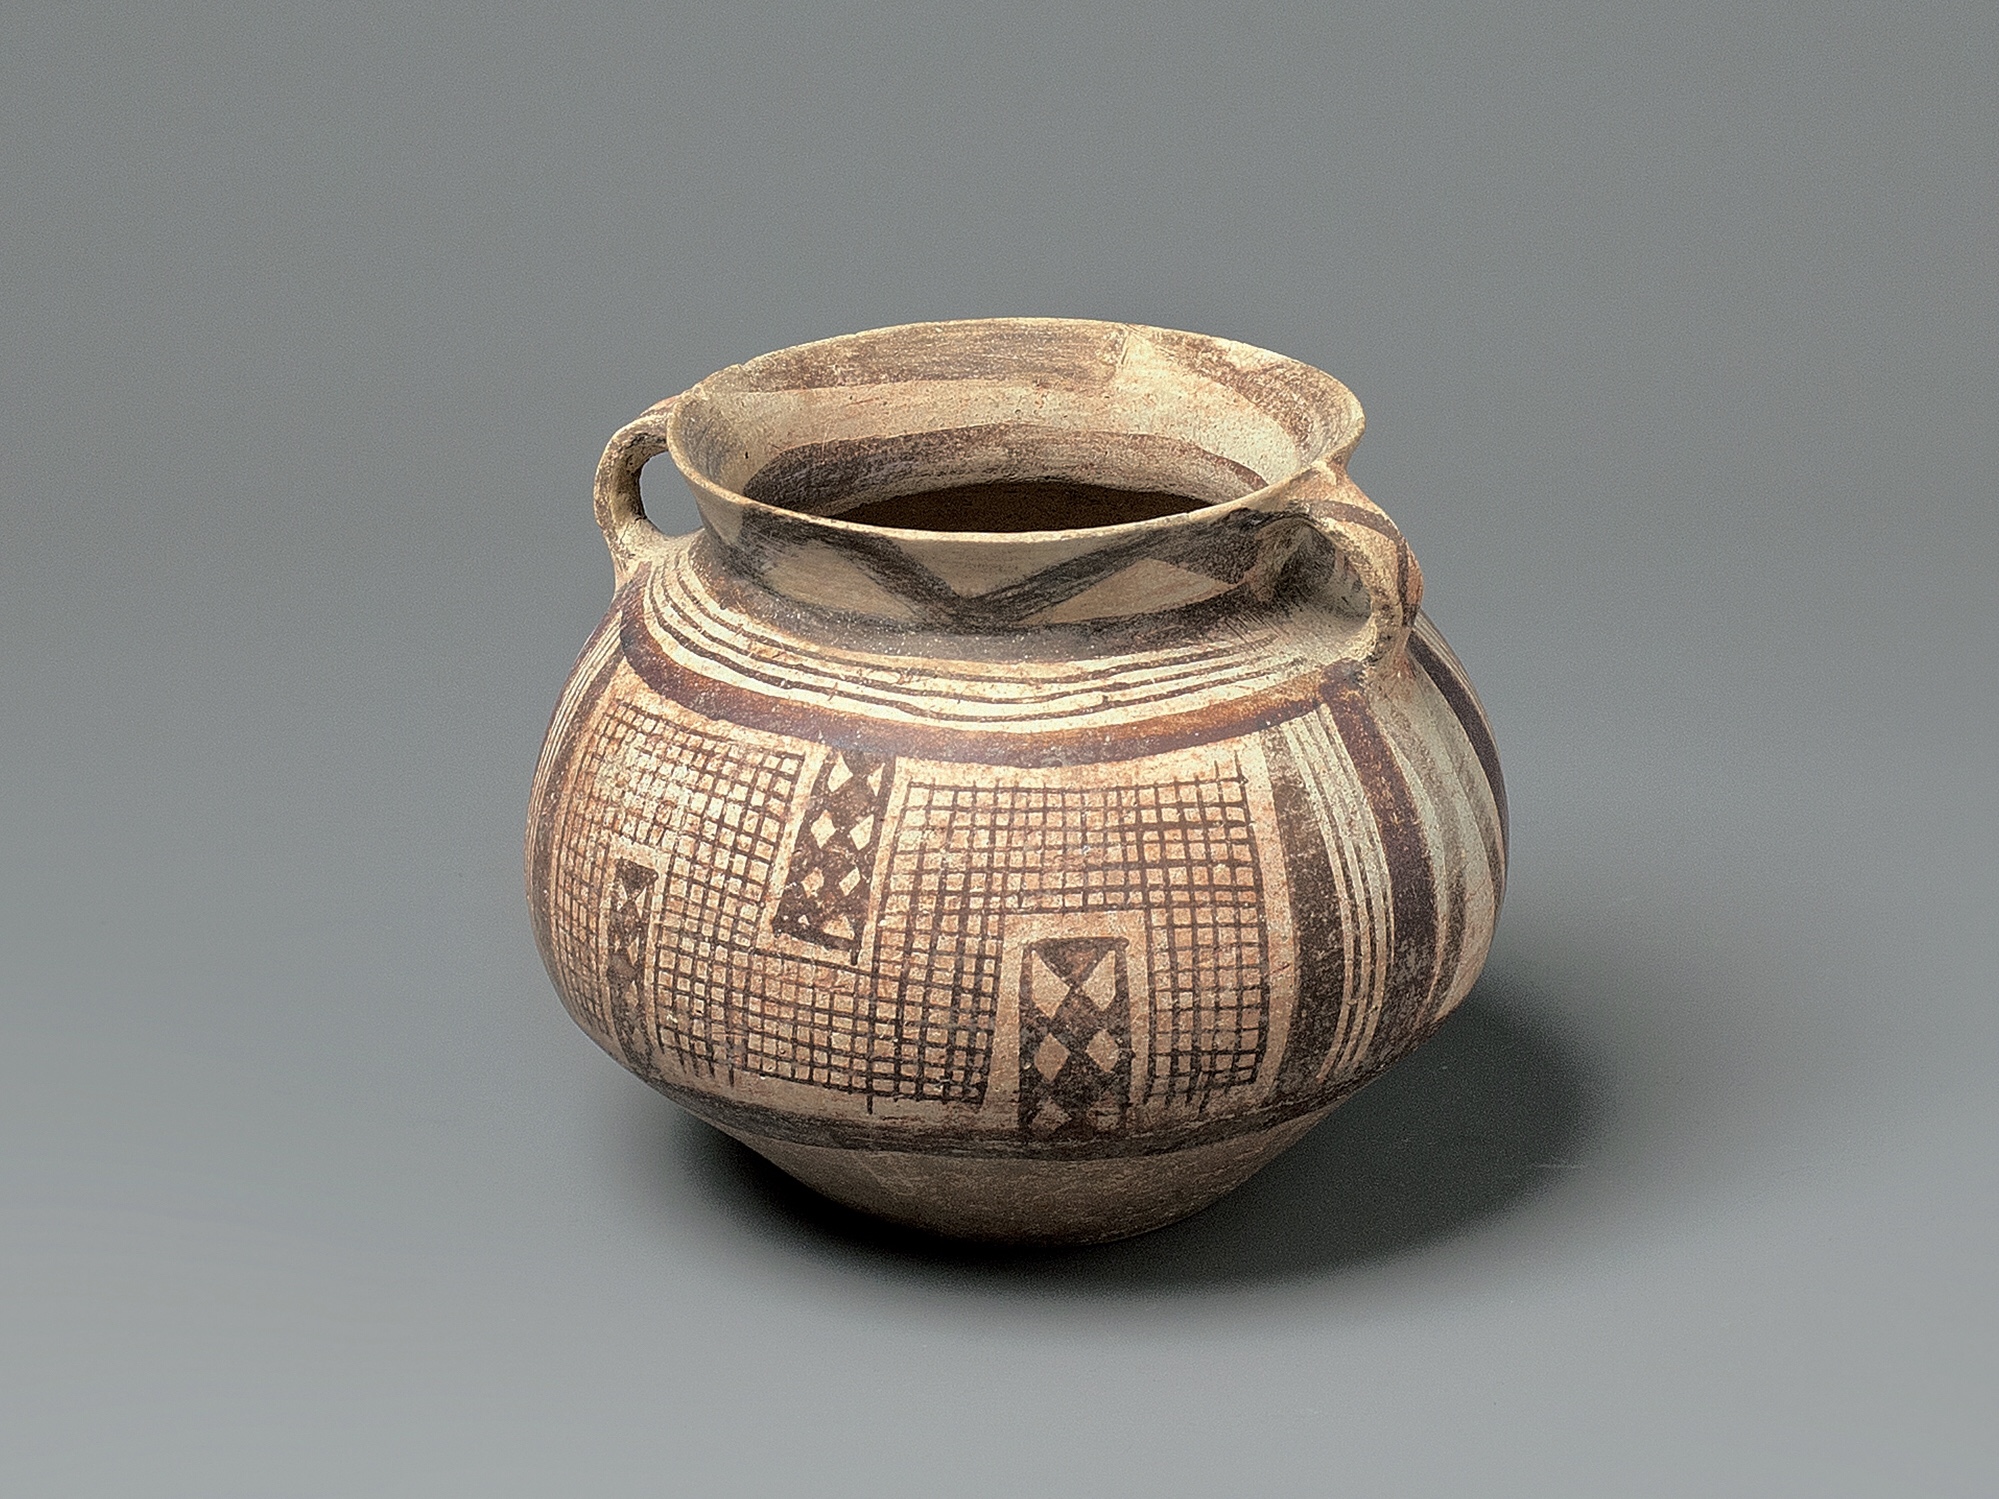 A Red Pottery Painted Vase, Gansu Province, Qijia Culture (2050-1700 Bc)